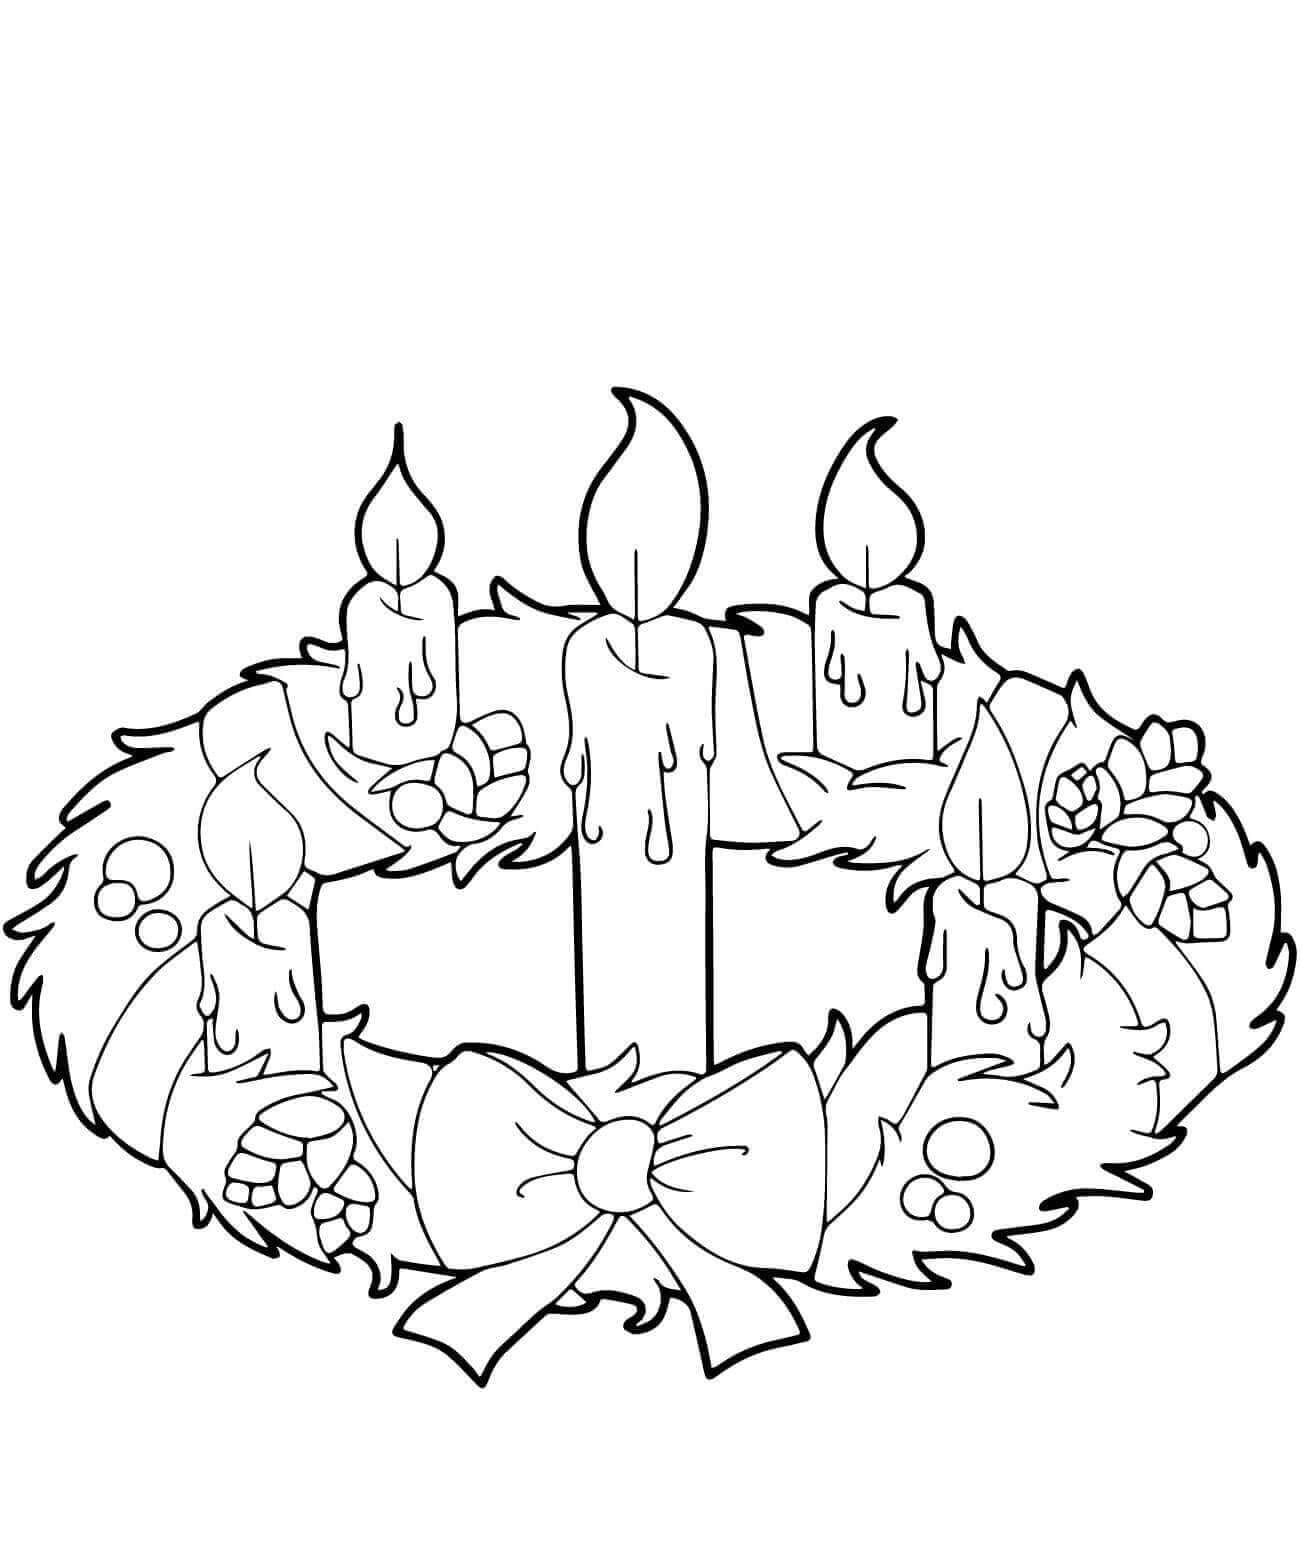 Printable Advent Wreath Coloring Page